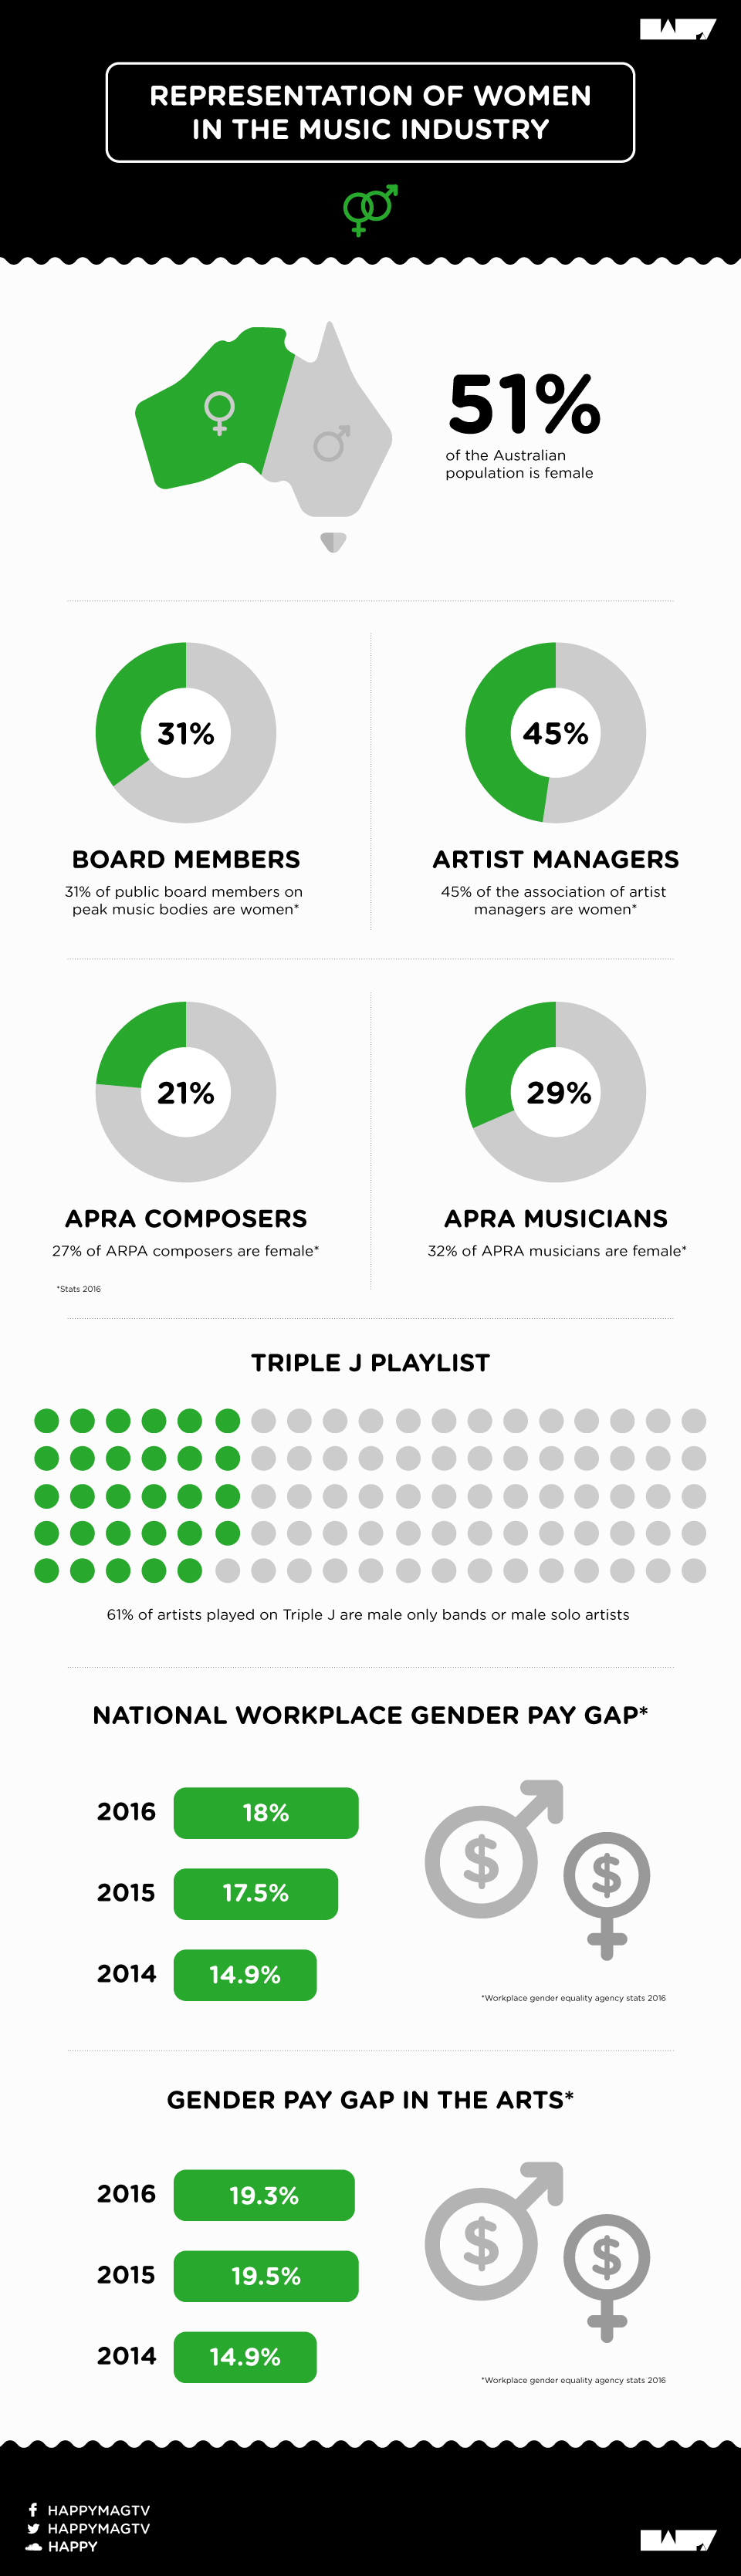 sexism-in-music-2016-infographic-1